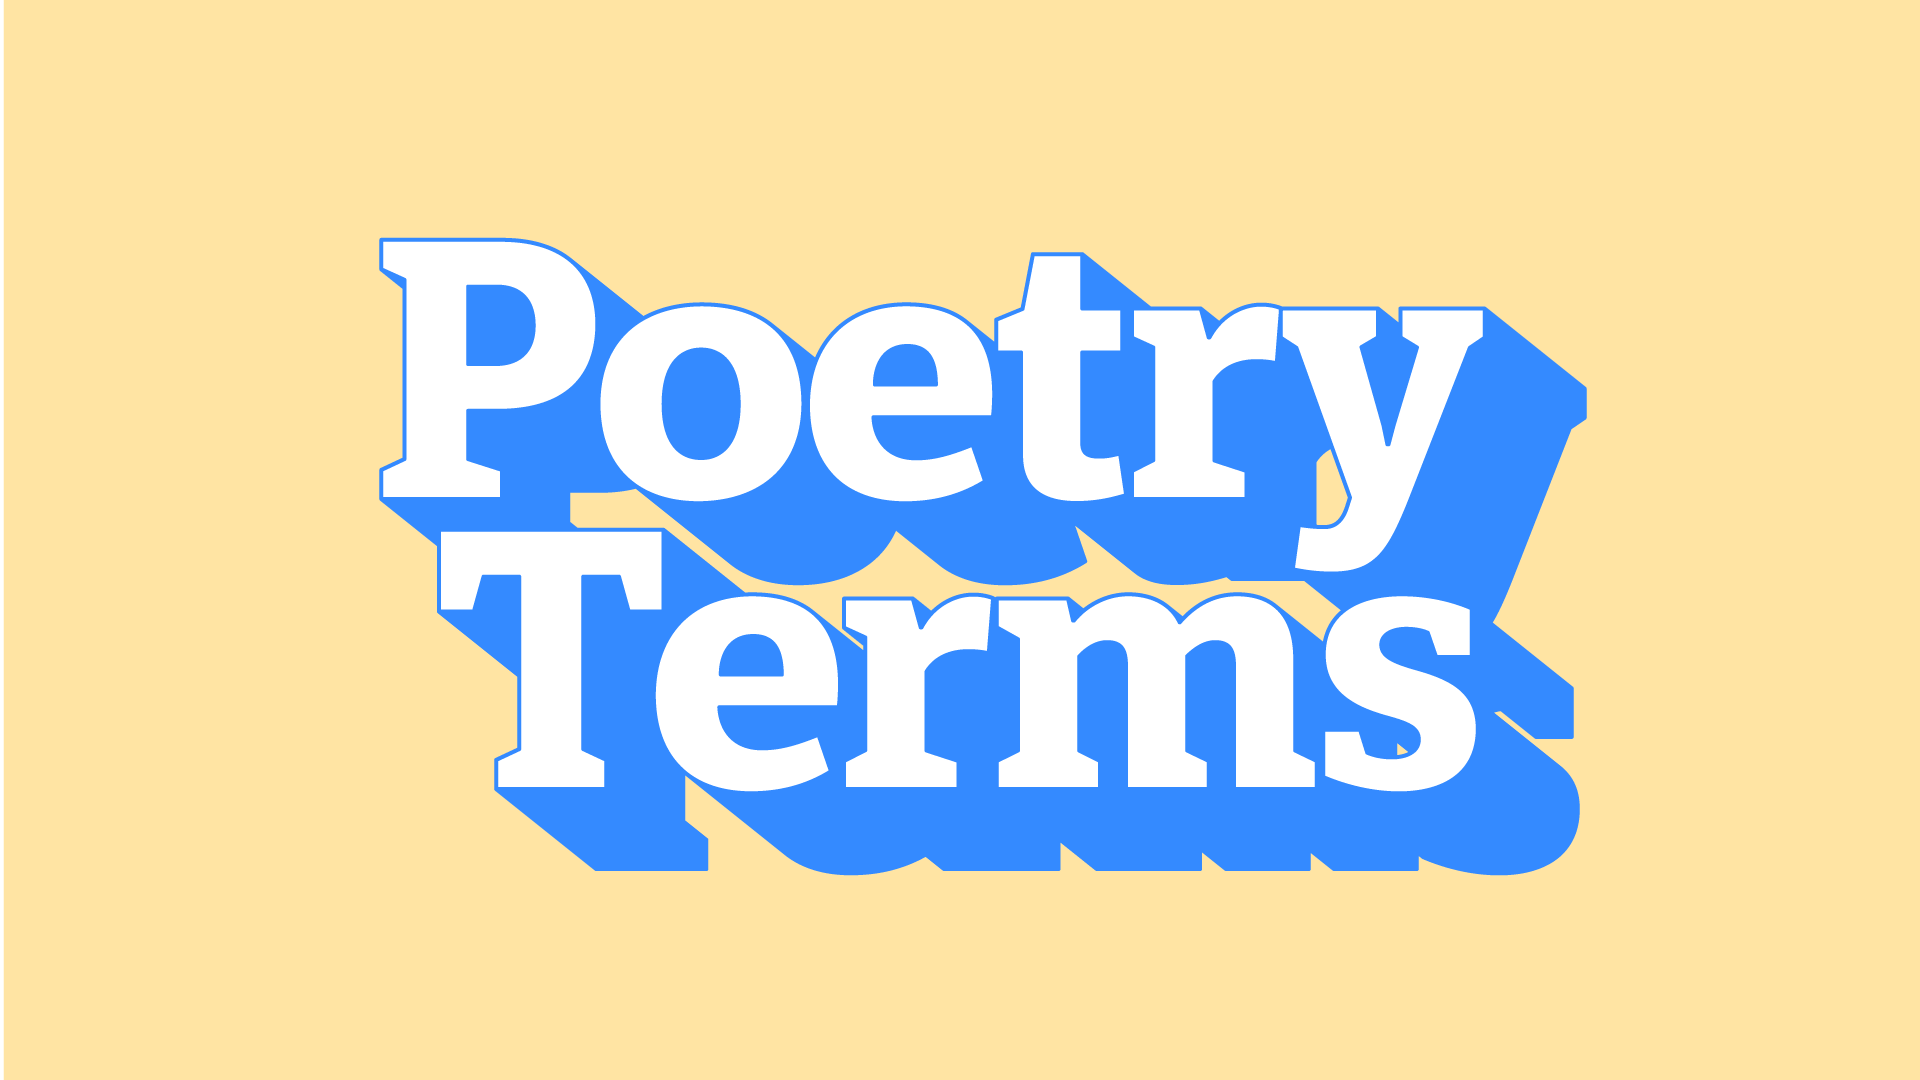 The 10 Essential Poetry Terms You Need Today (Yes, Today)